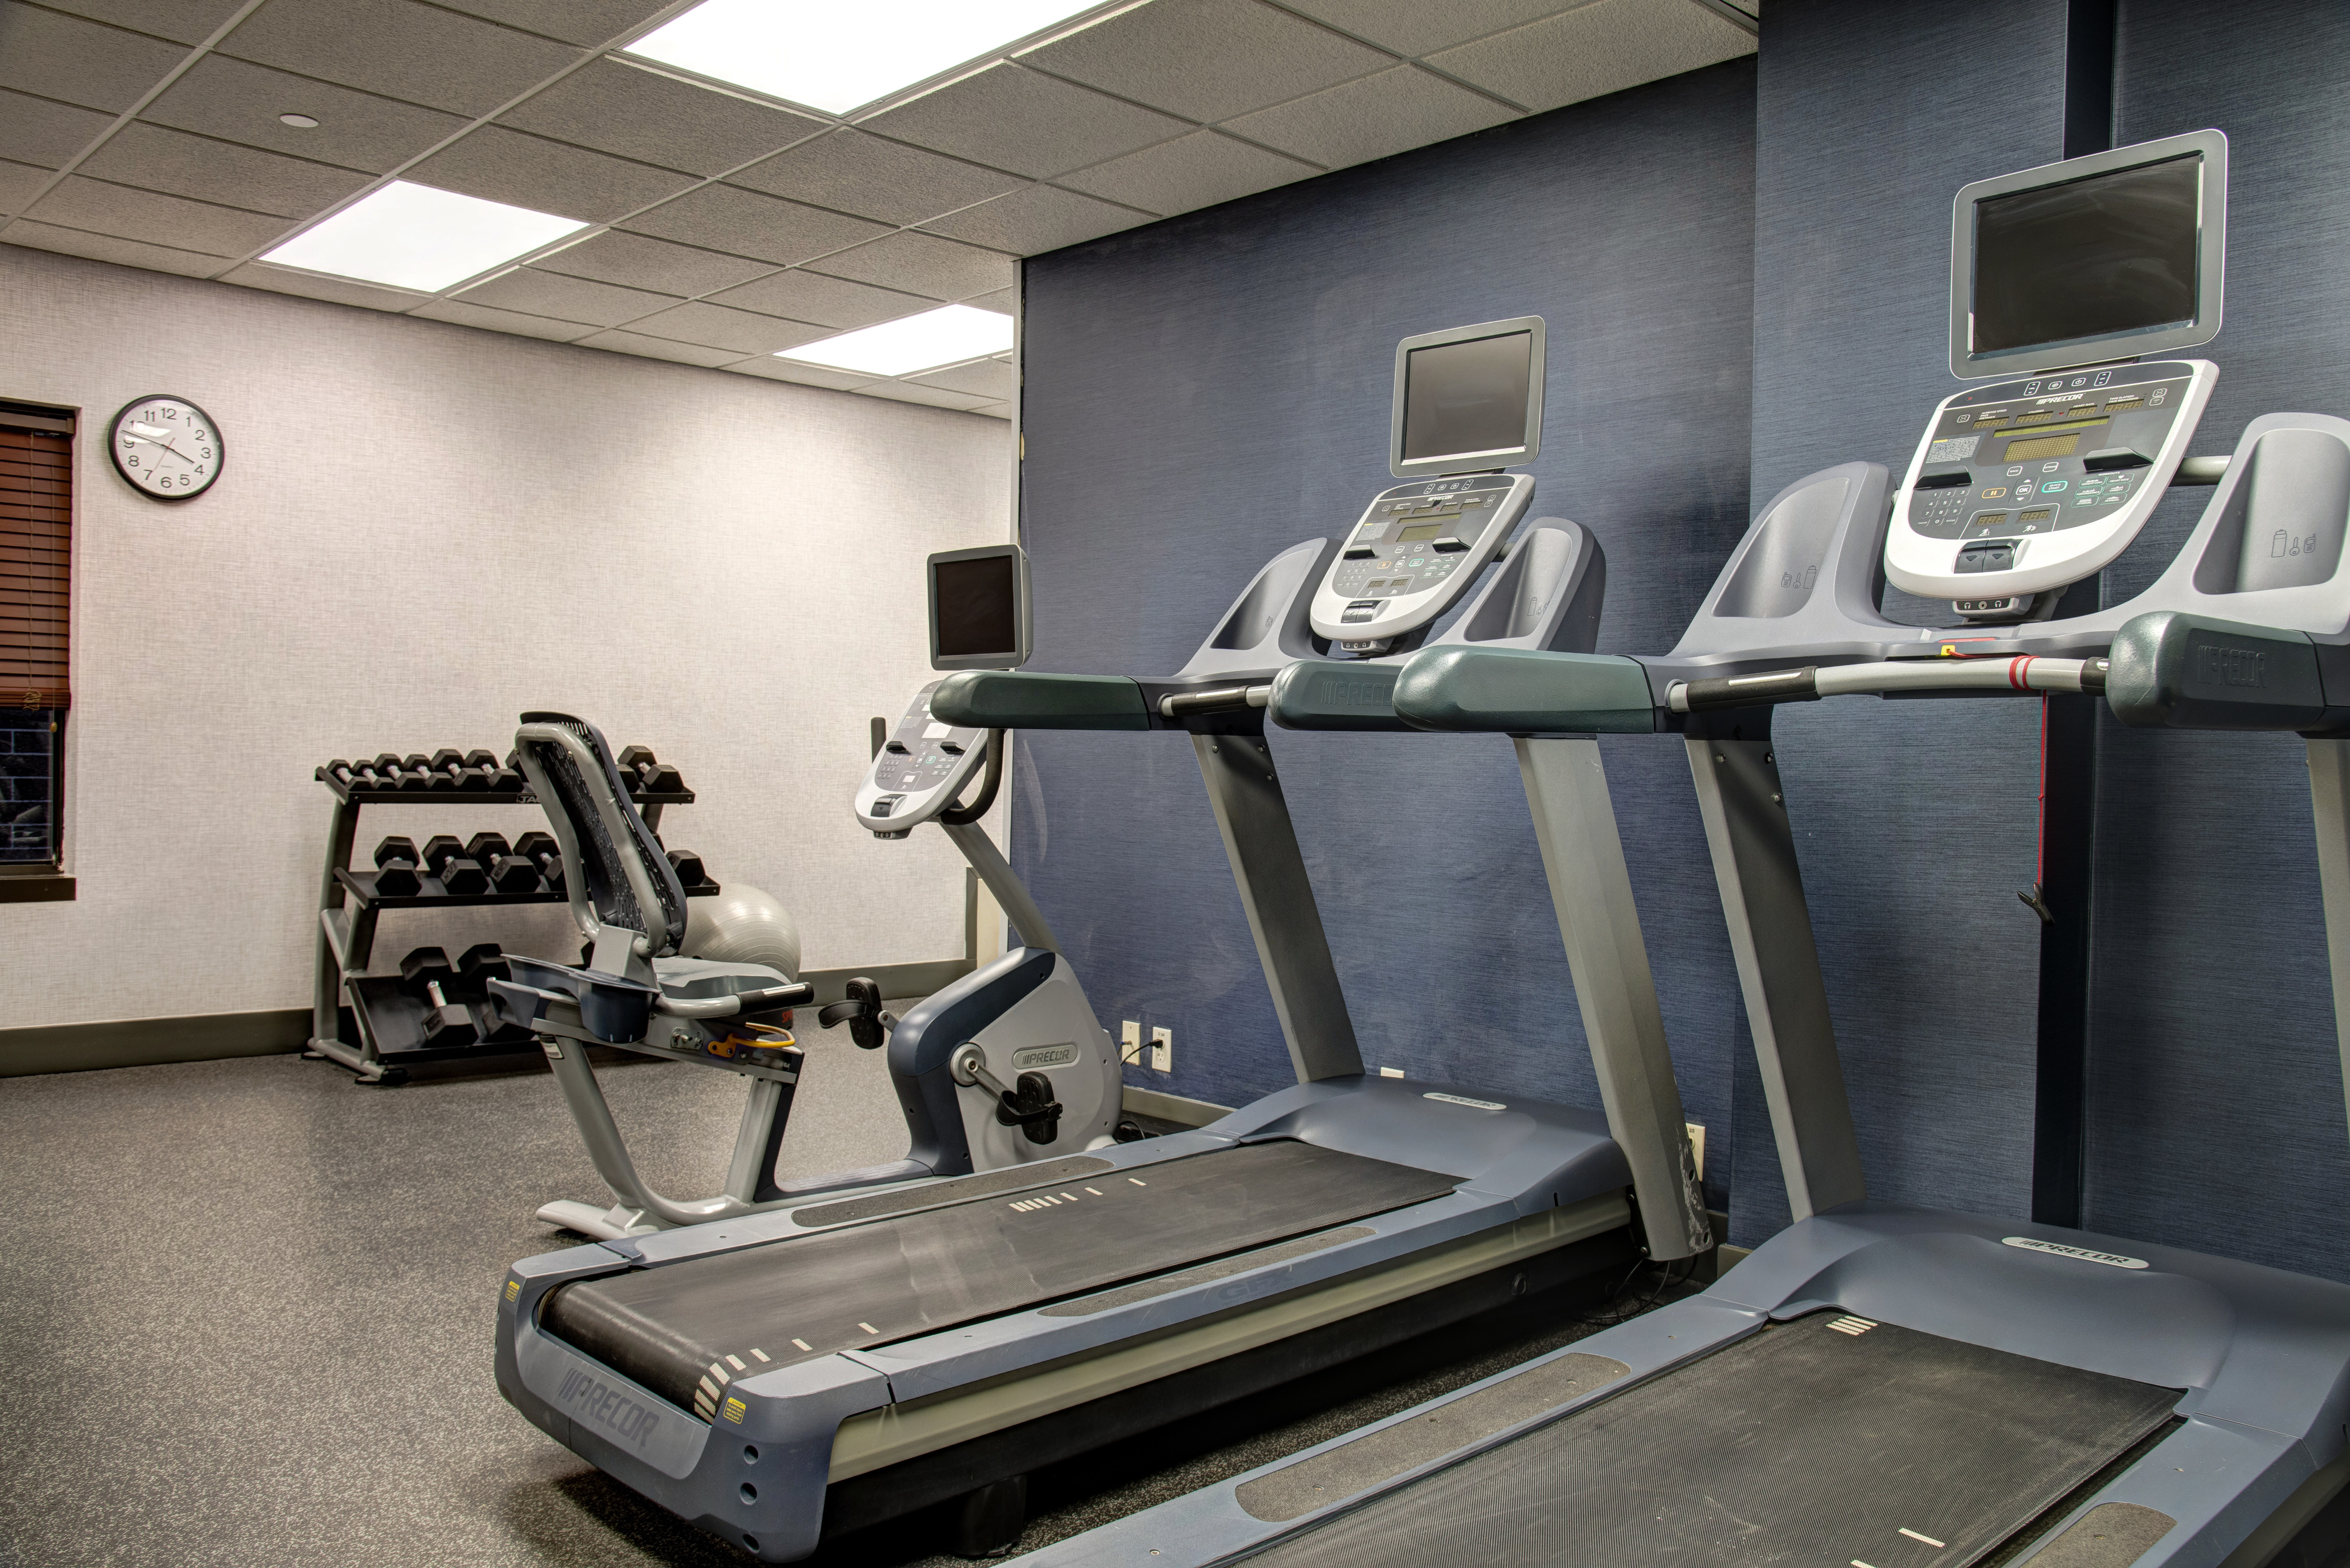 Fitness Center - Treadmills and Free Weights